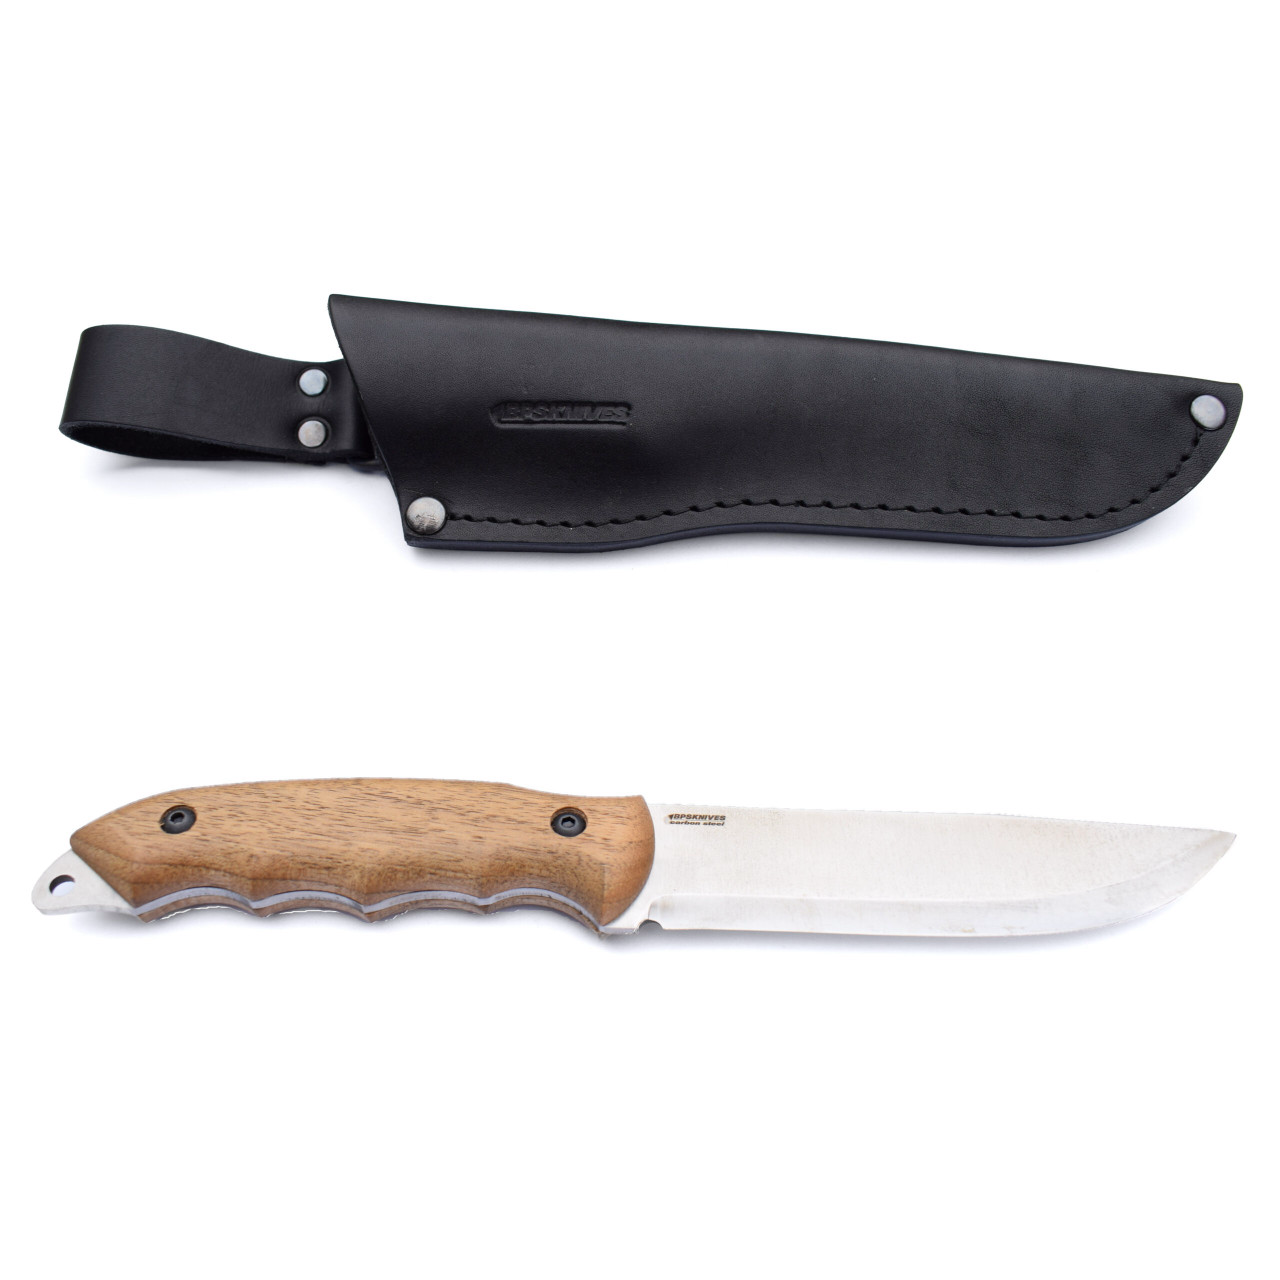 product image for BPS Knives HK 5 Fixed Blade Knife Carbon Steel Blade